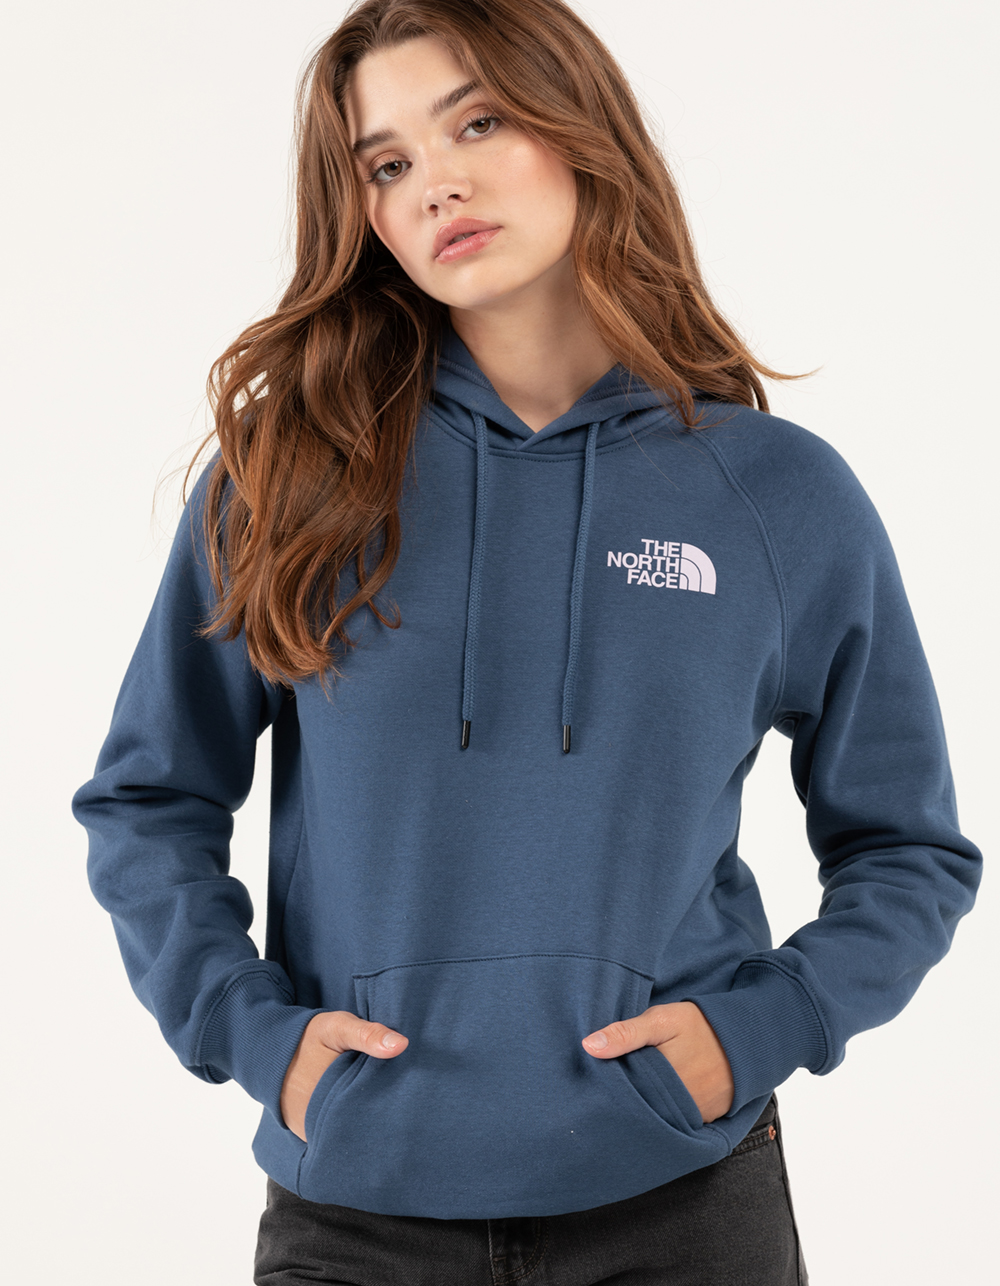 THE NORTH FACE Graphic Injection Womens Hoodie - DARK BLUE | Tillys